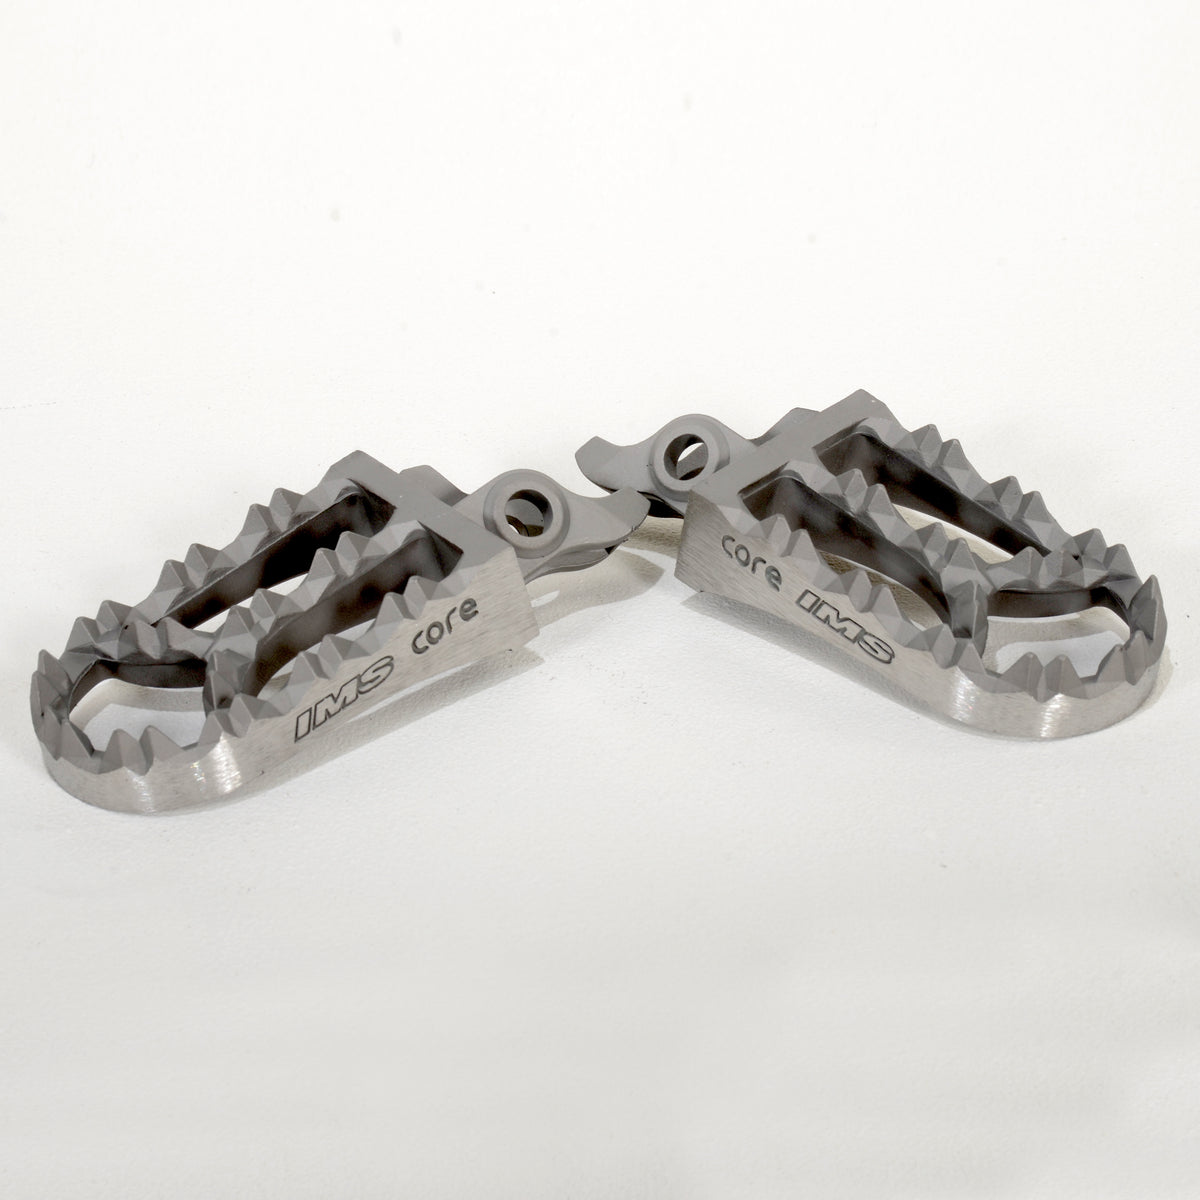 IMS Products Core Enduro Footpegs #42219